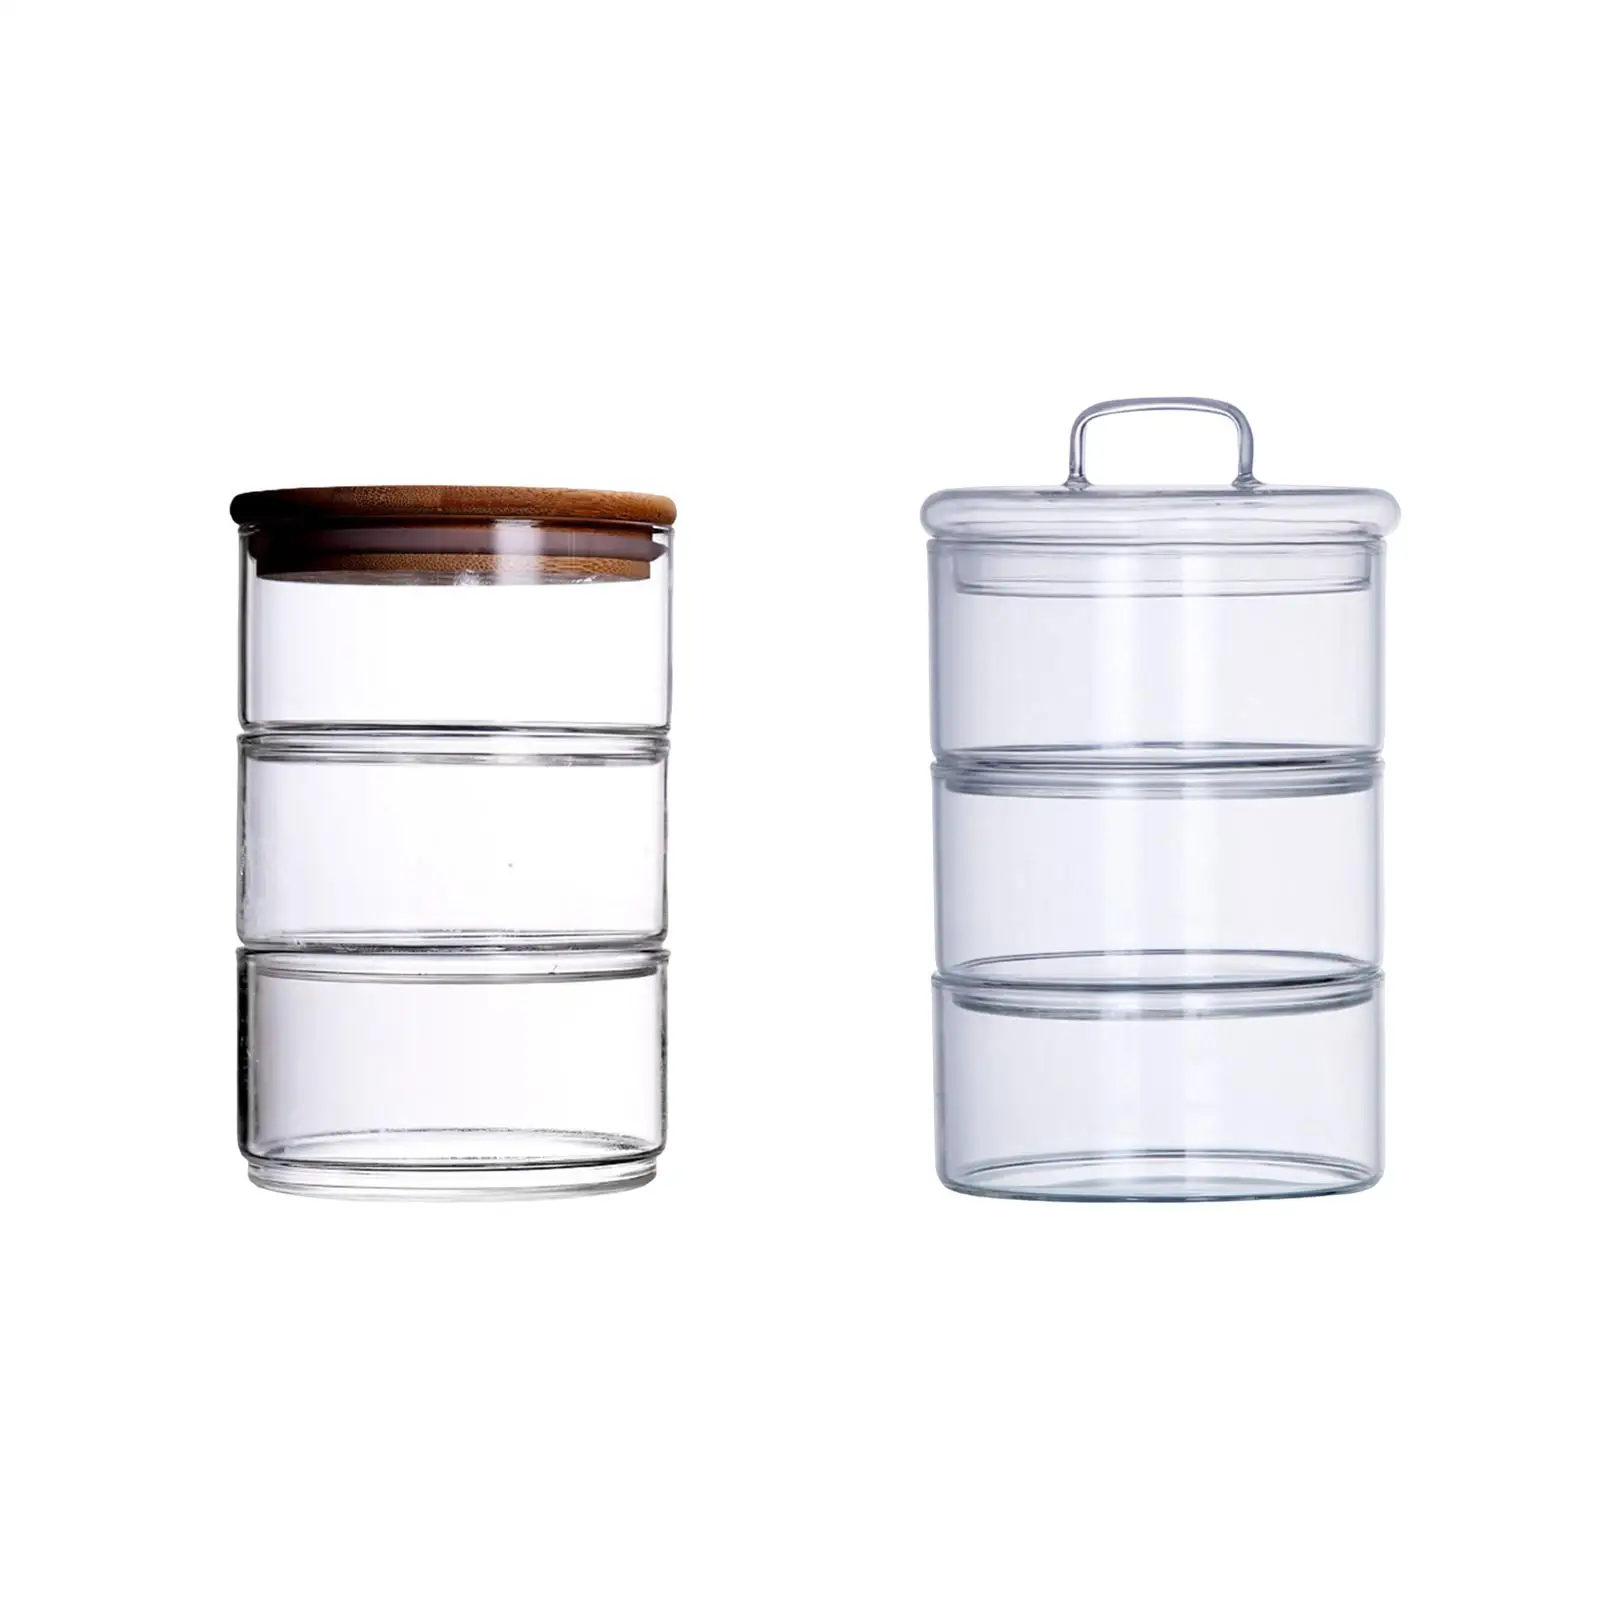 3 Tier Glass Food Jar Grain Container with Lid Stackable Glass Jars for Snack Kitchen Countertop Cabinet Shelf